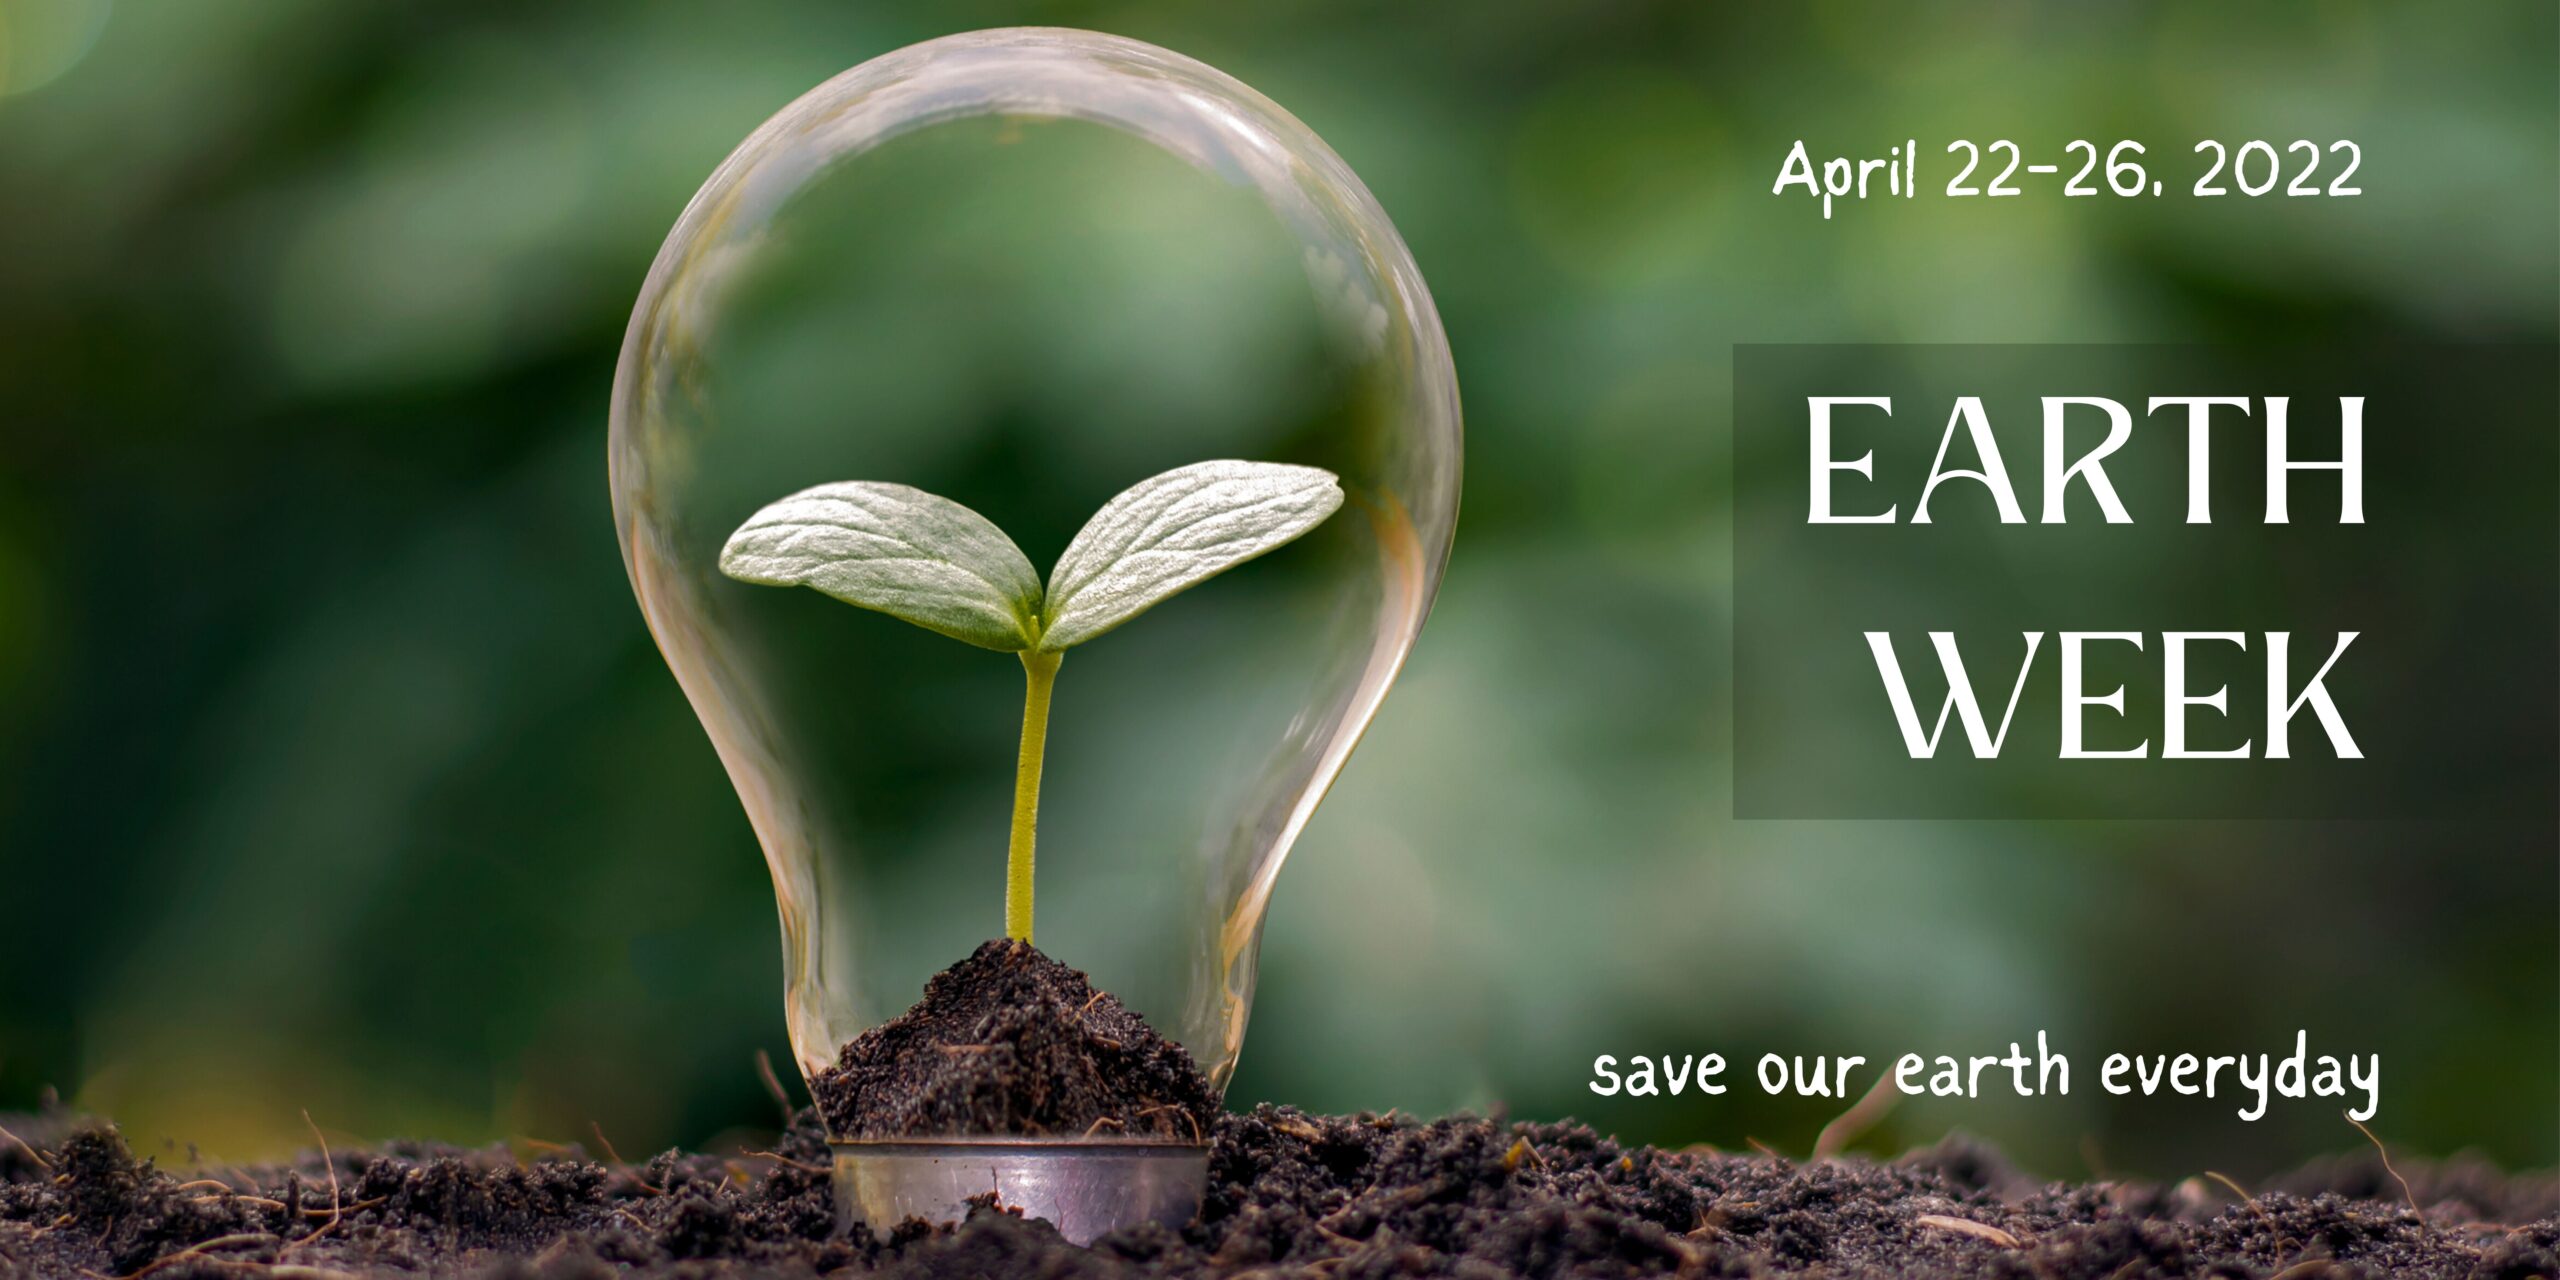 Photo with seedling growing inside lightbulb and text Earth Week, April 22-26, 2024, save our earth every day.